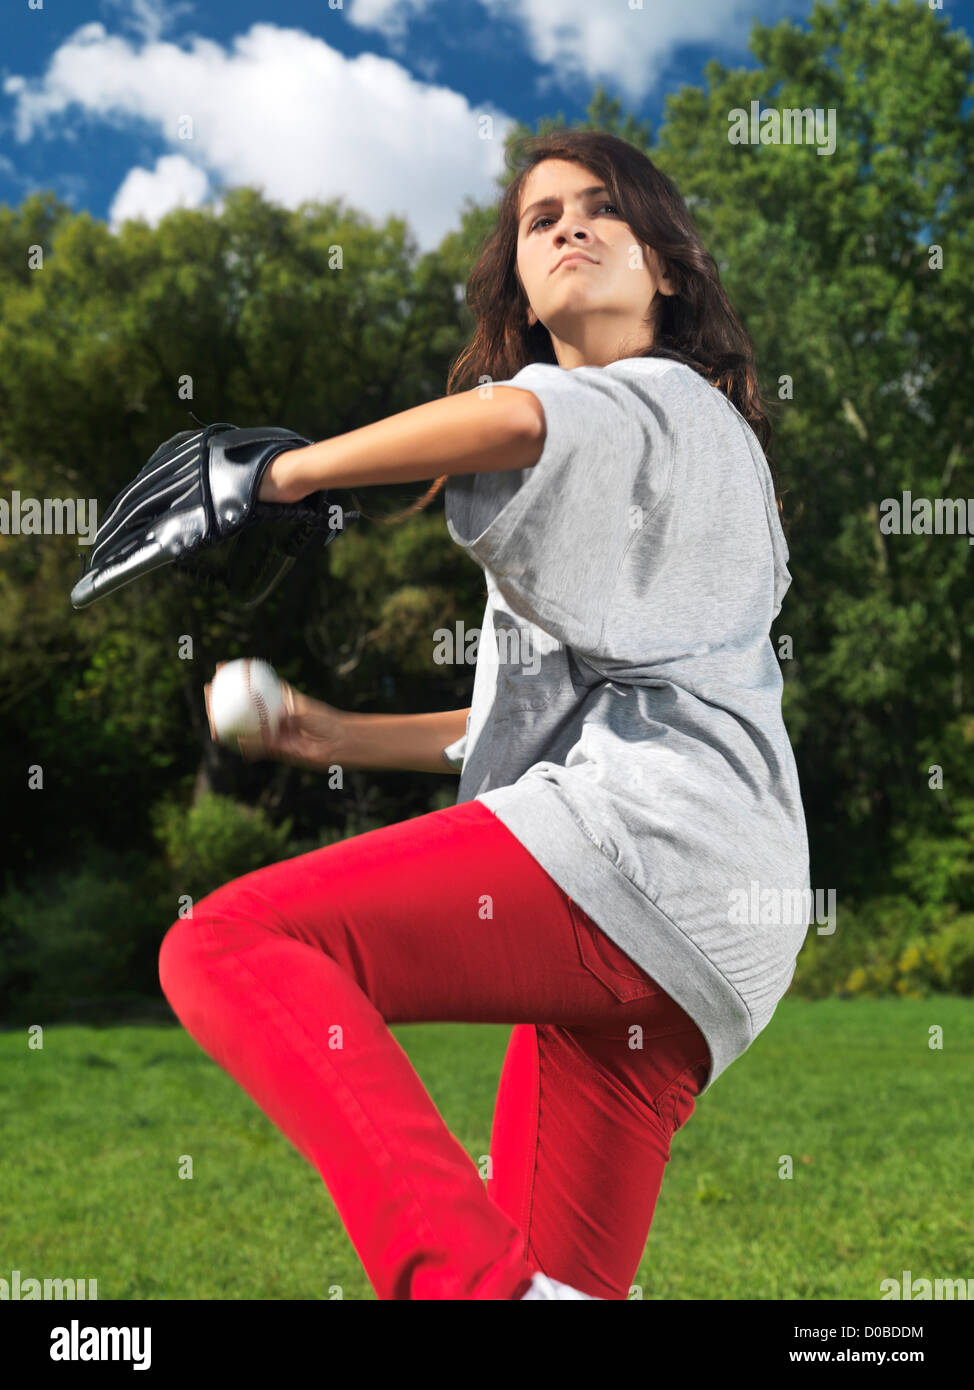 Action shot of a teenage girl with a glove practicing baseball, throing a ball, active summer lifestyle. Stock Photo